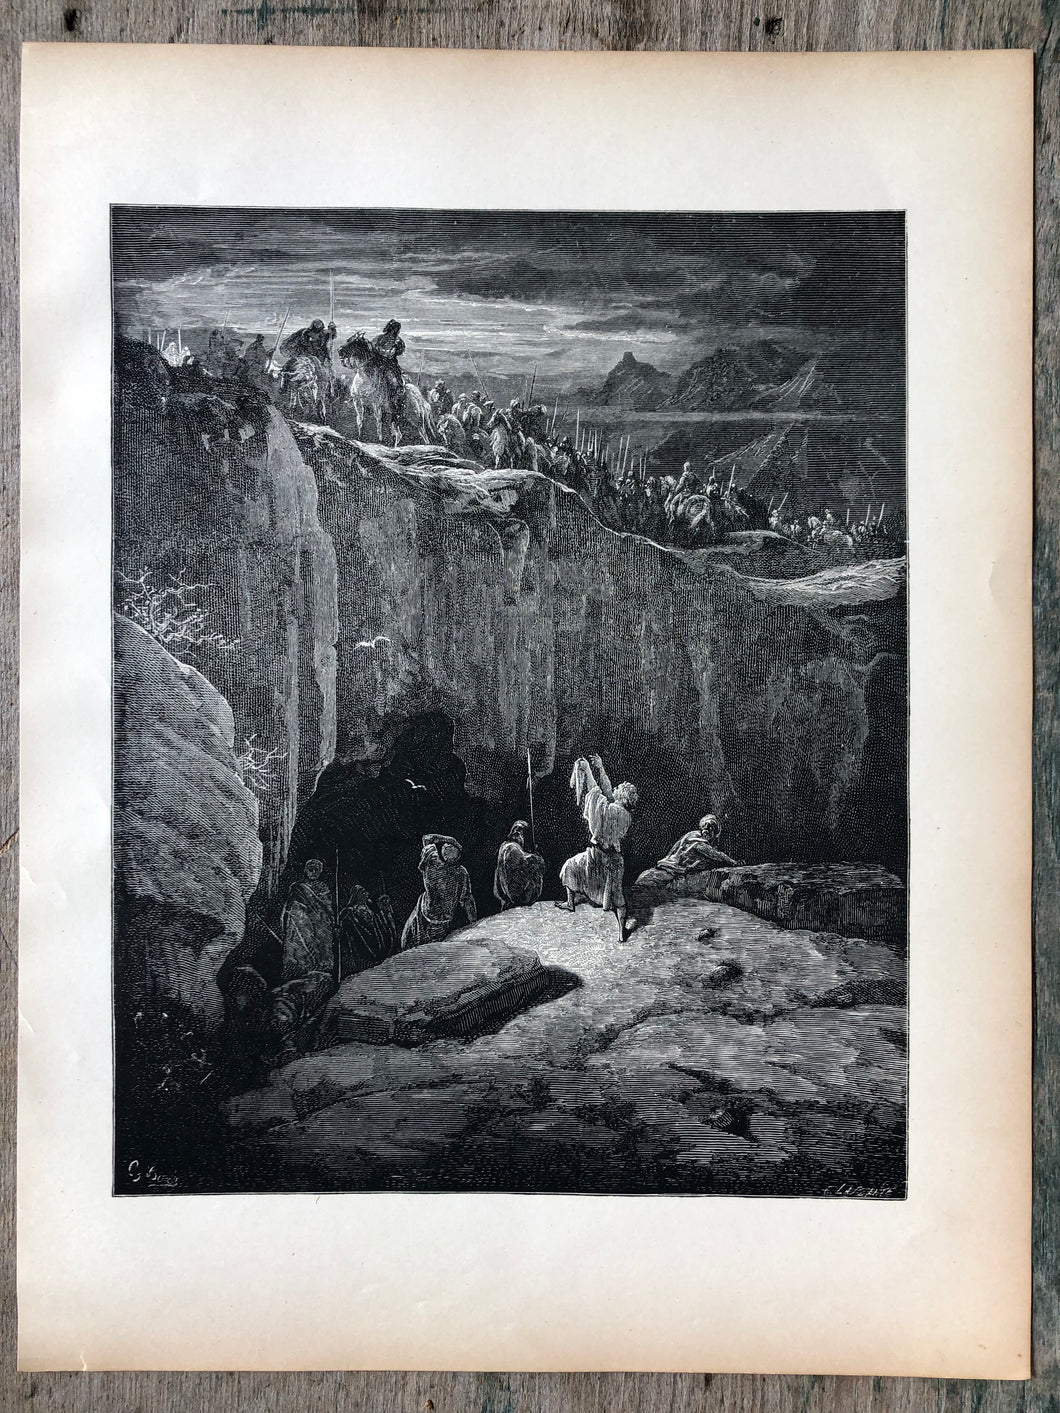 David Spares Saul. From The Dore Bible Gallery by Gustave Dore